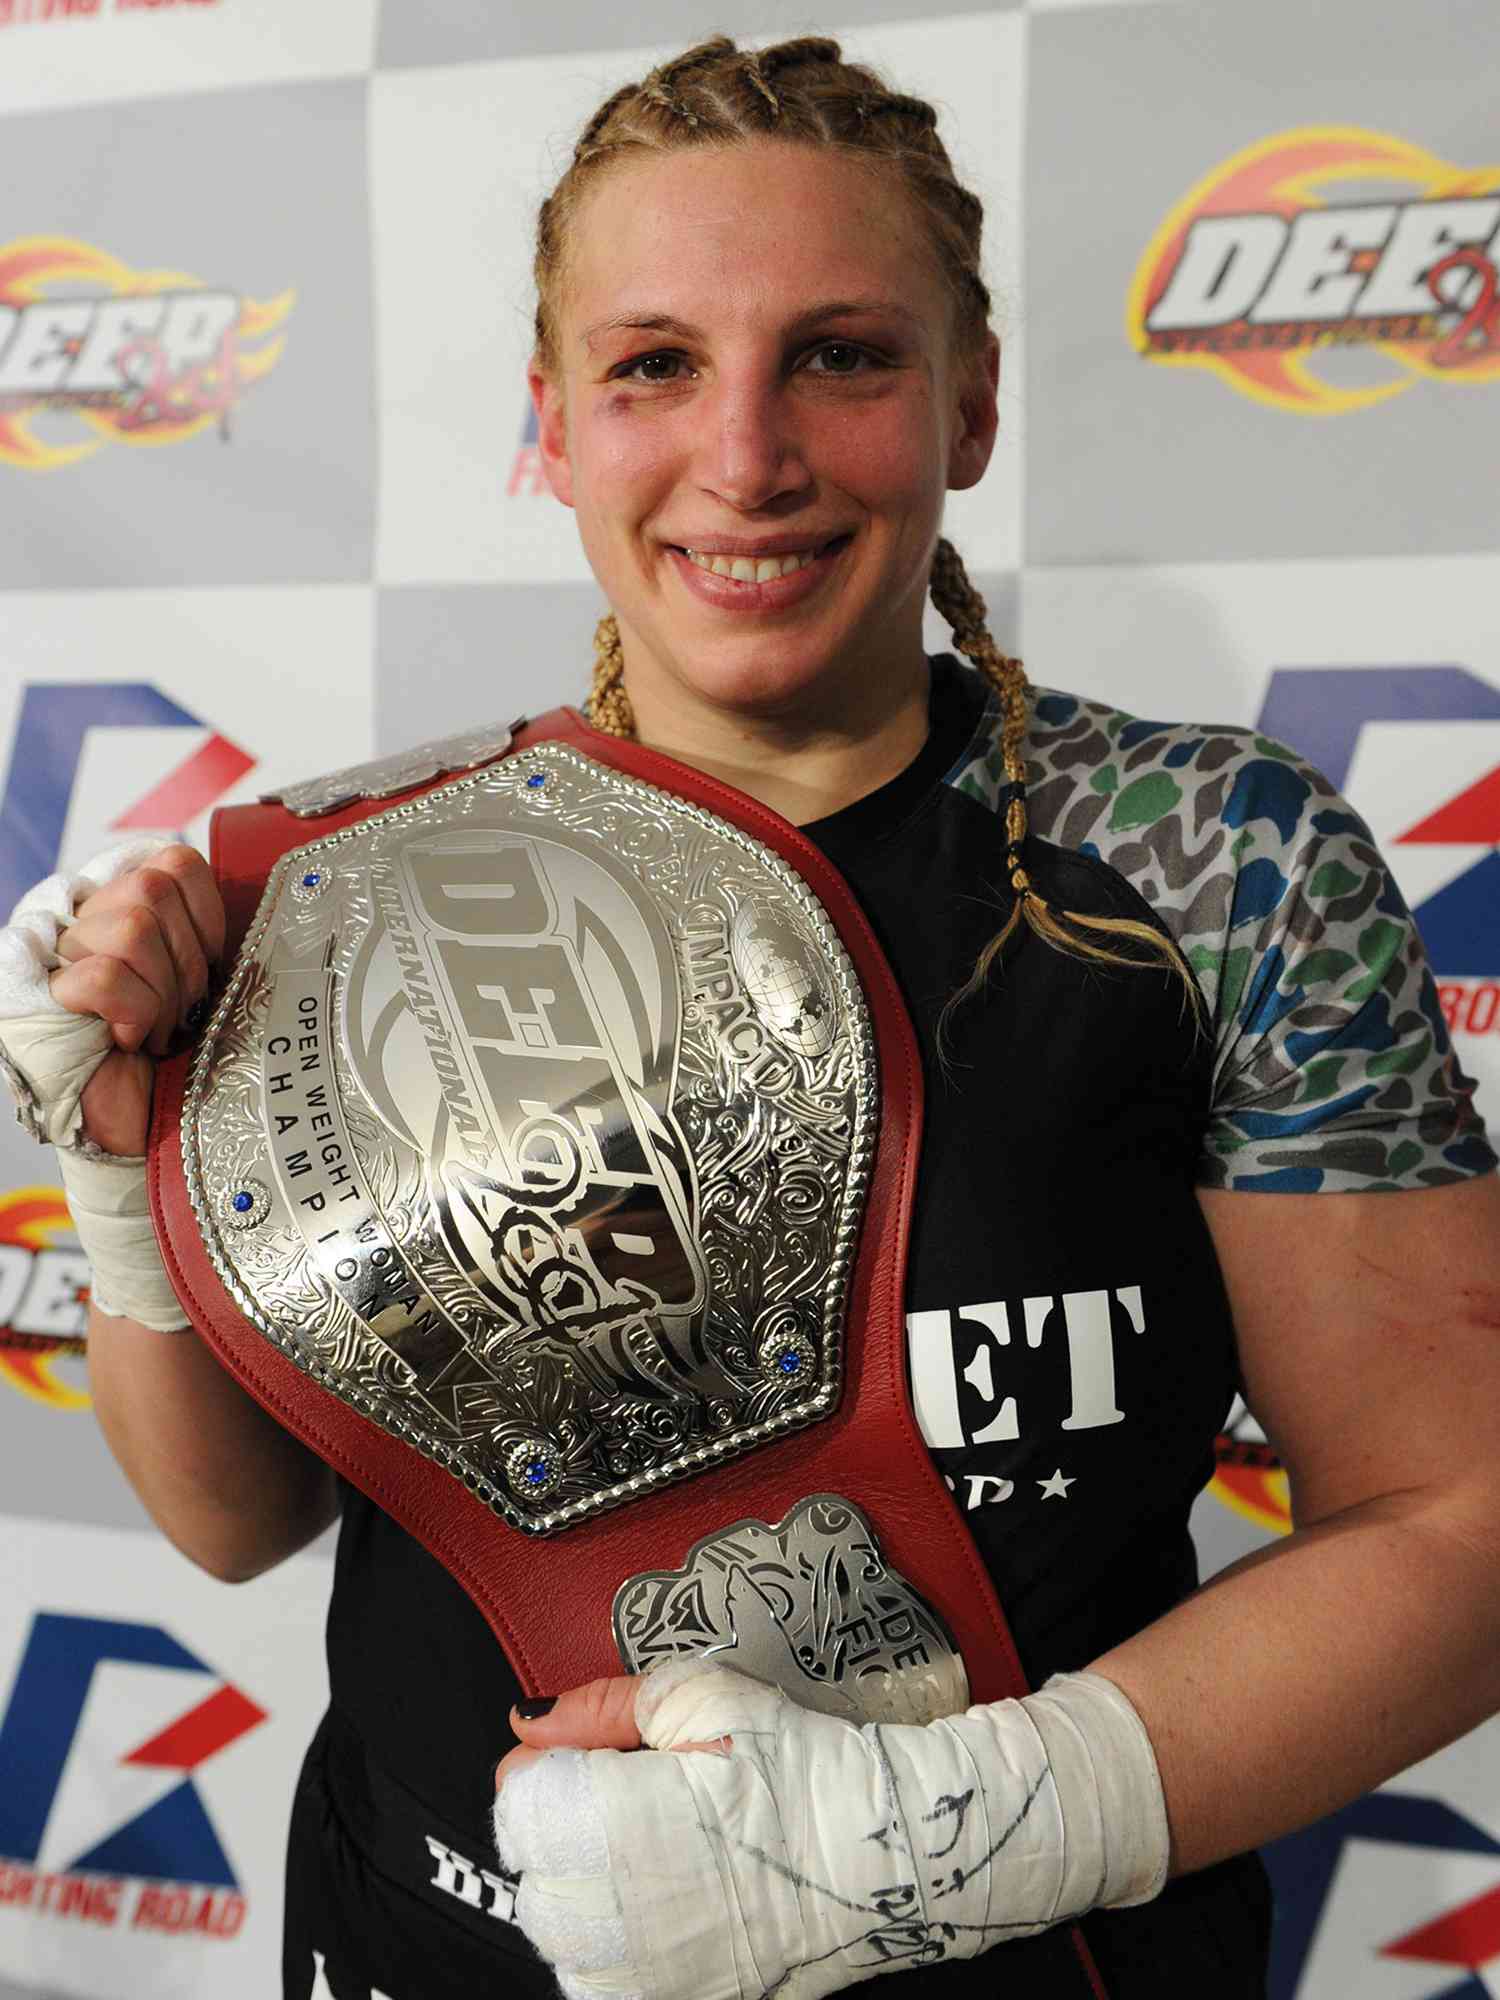 Amanda Lucas poses with the belt in her post match media conference after the DEEP57 fight against Yumiko Hotta on February 18, 2012 in Tokyo, Japan. 